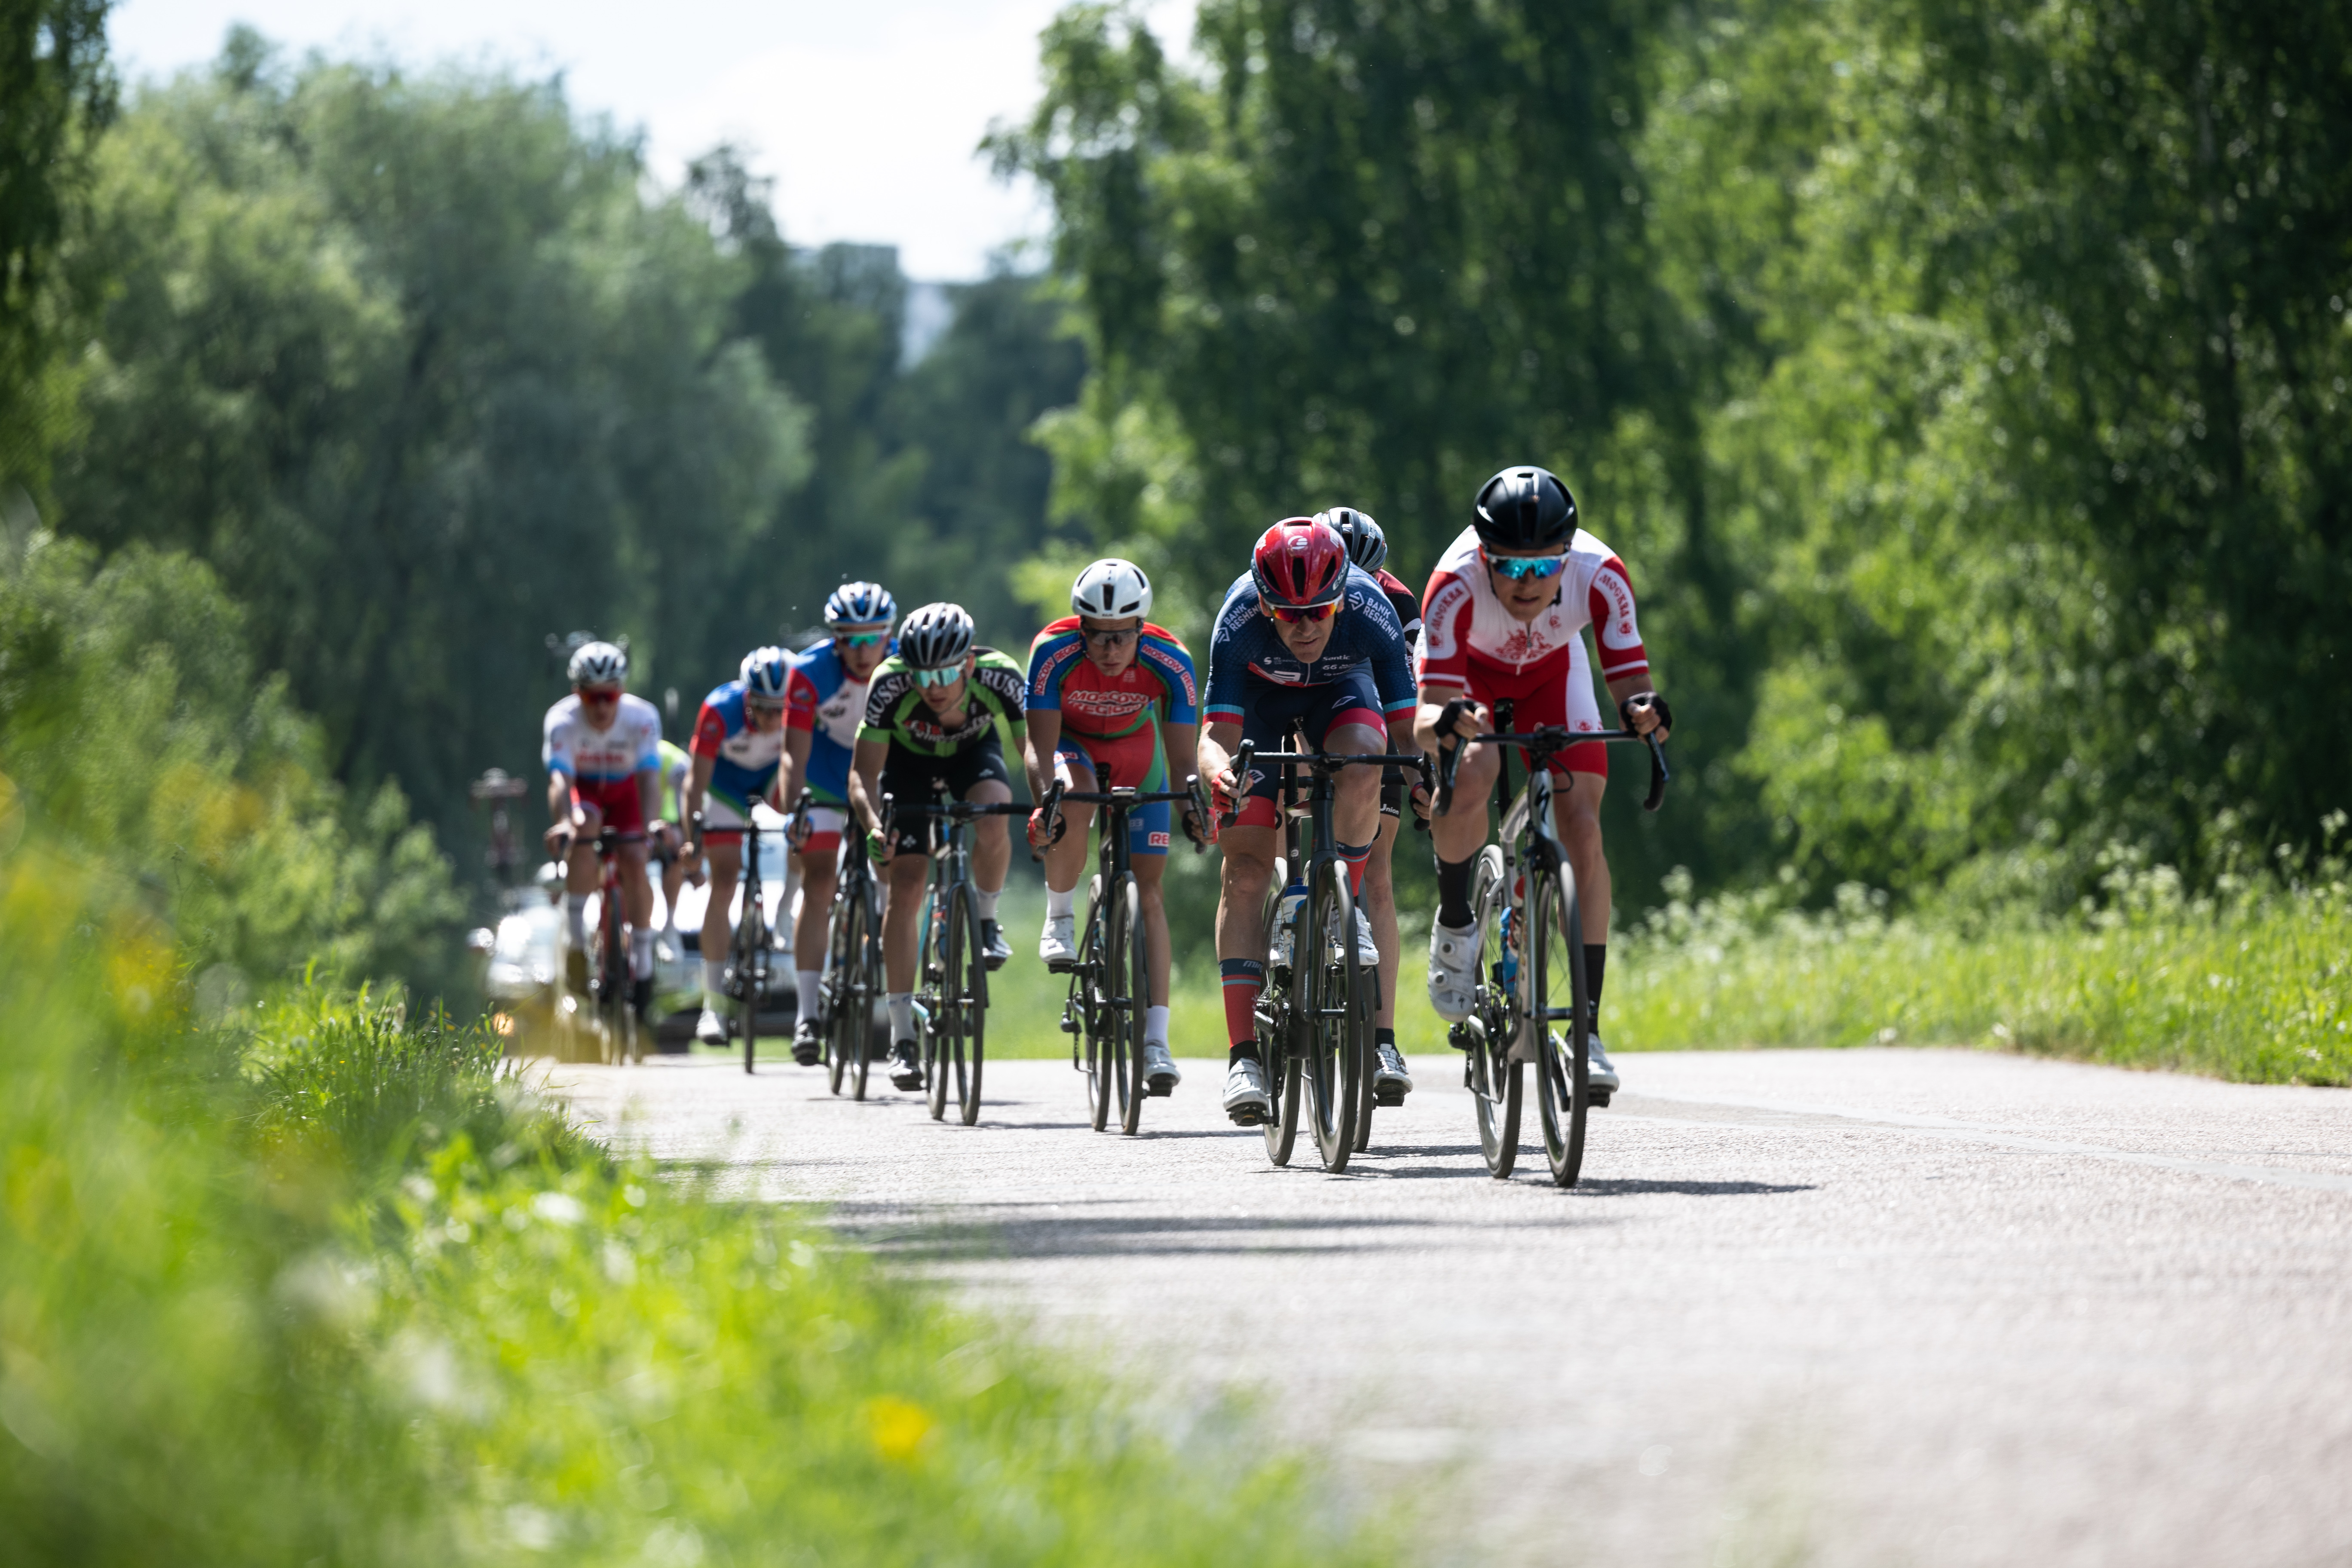 Minsk Cycling Club Riders Will Participate in Five Rings of Moscow